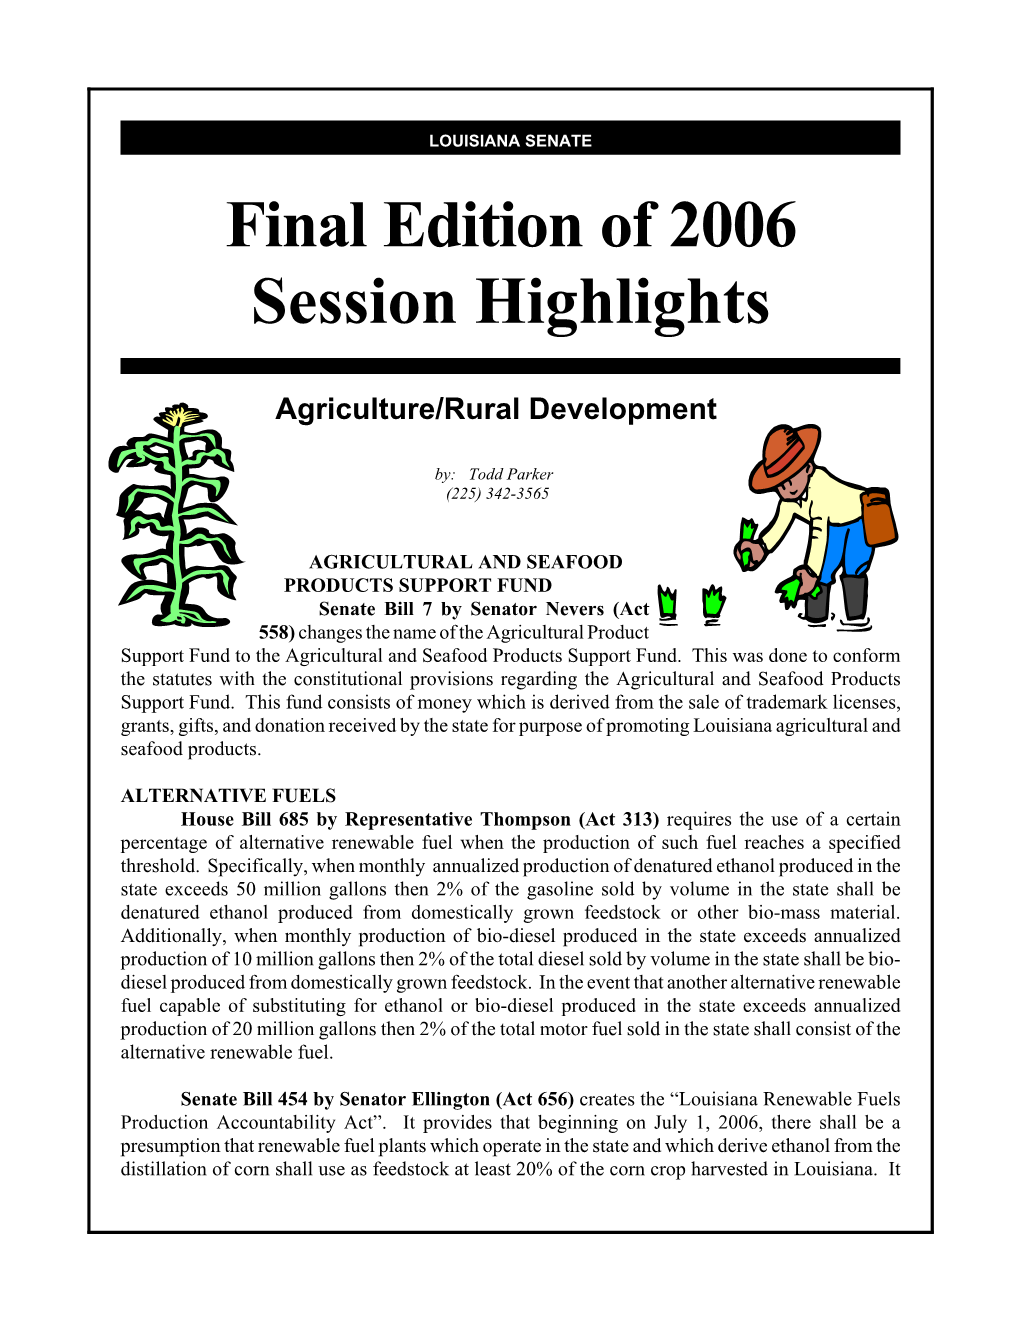 Final Edition of 2006 Session Highlights